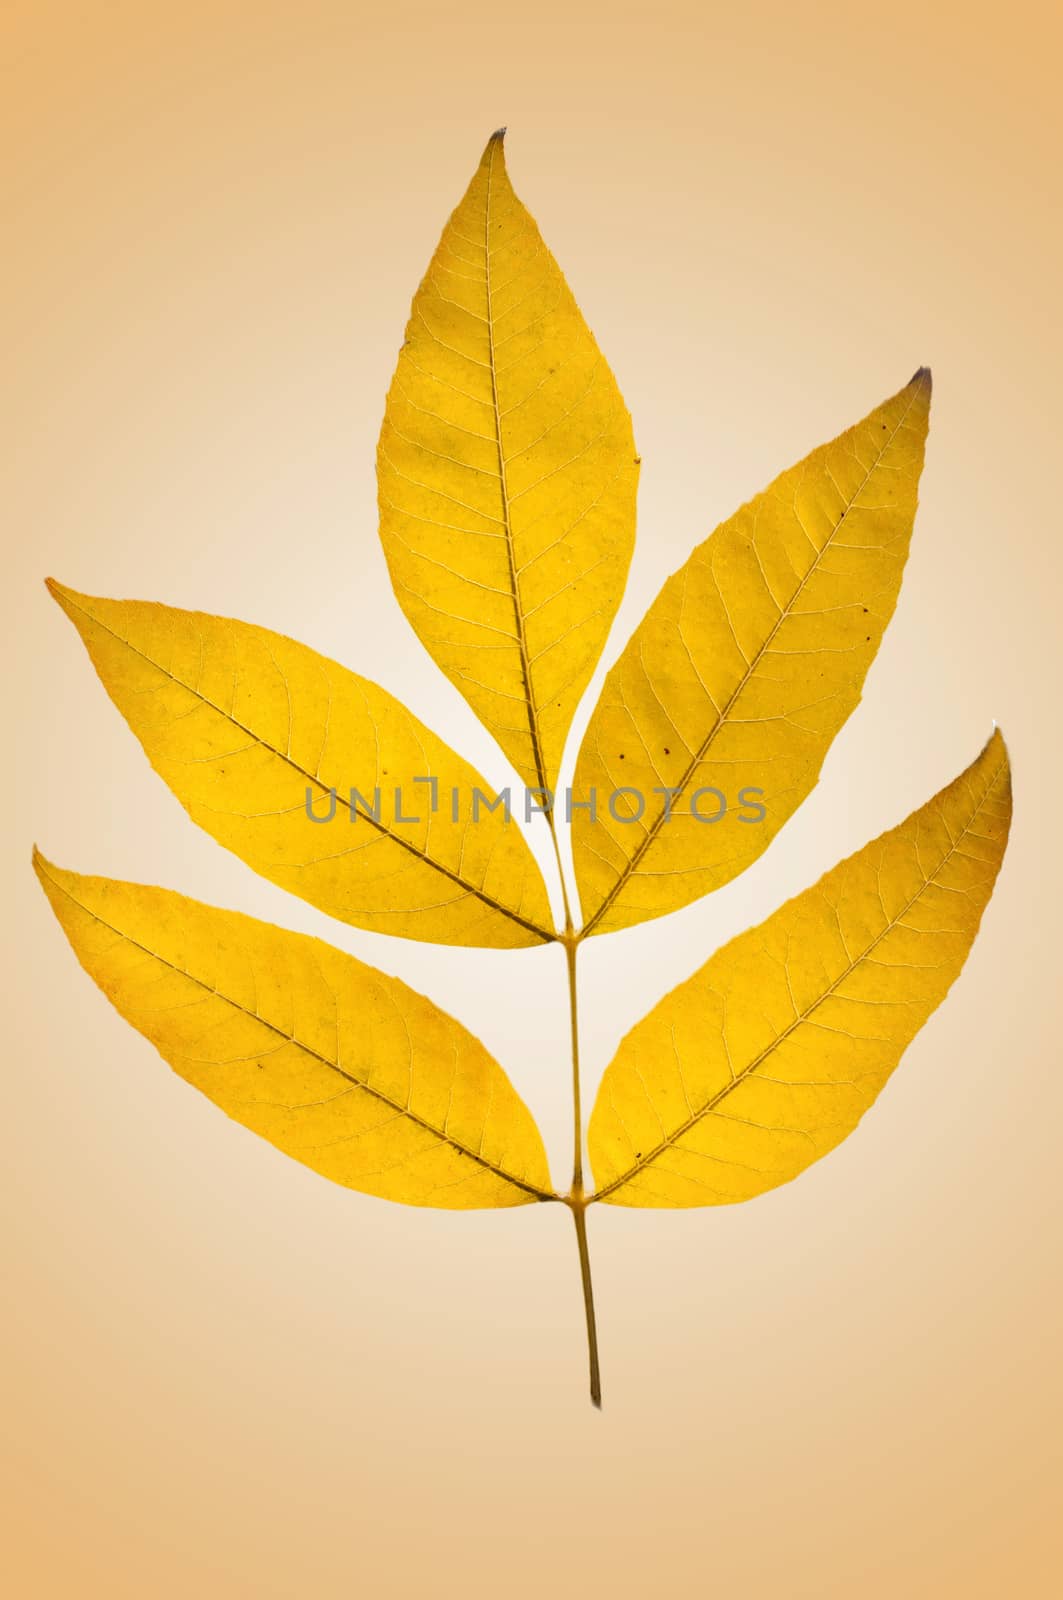 Typicall little branch of Ash with five leaves in a beautifull yellow color of autumn